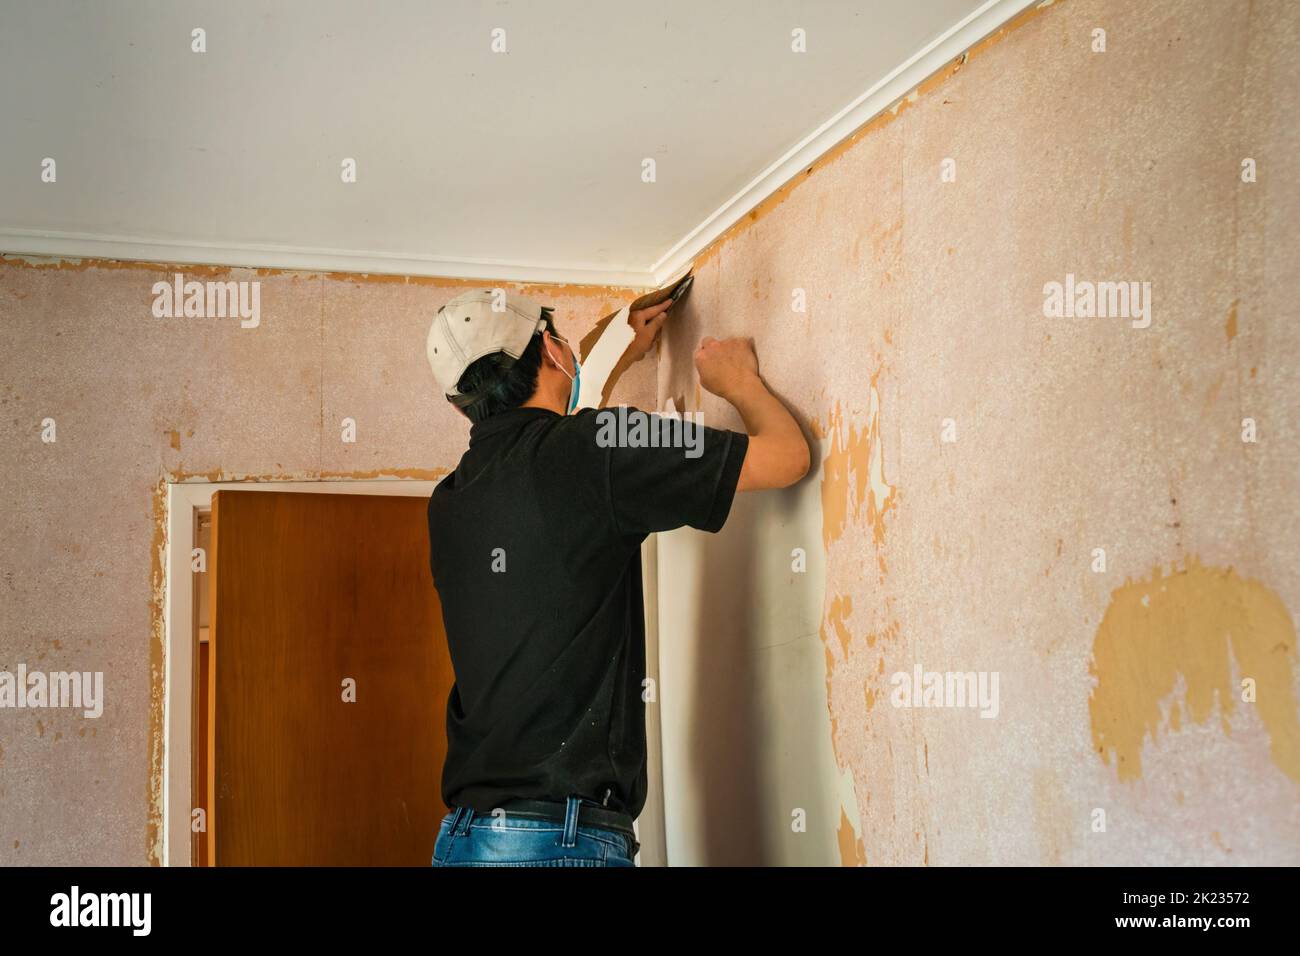 Man removing wallpaper inside an old house Stock Photo